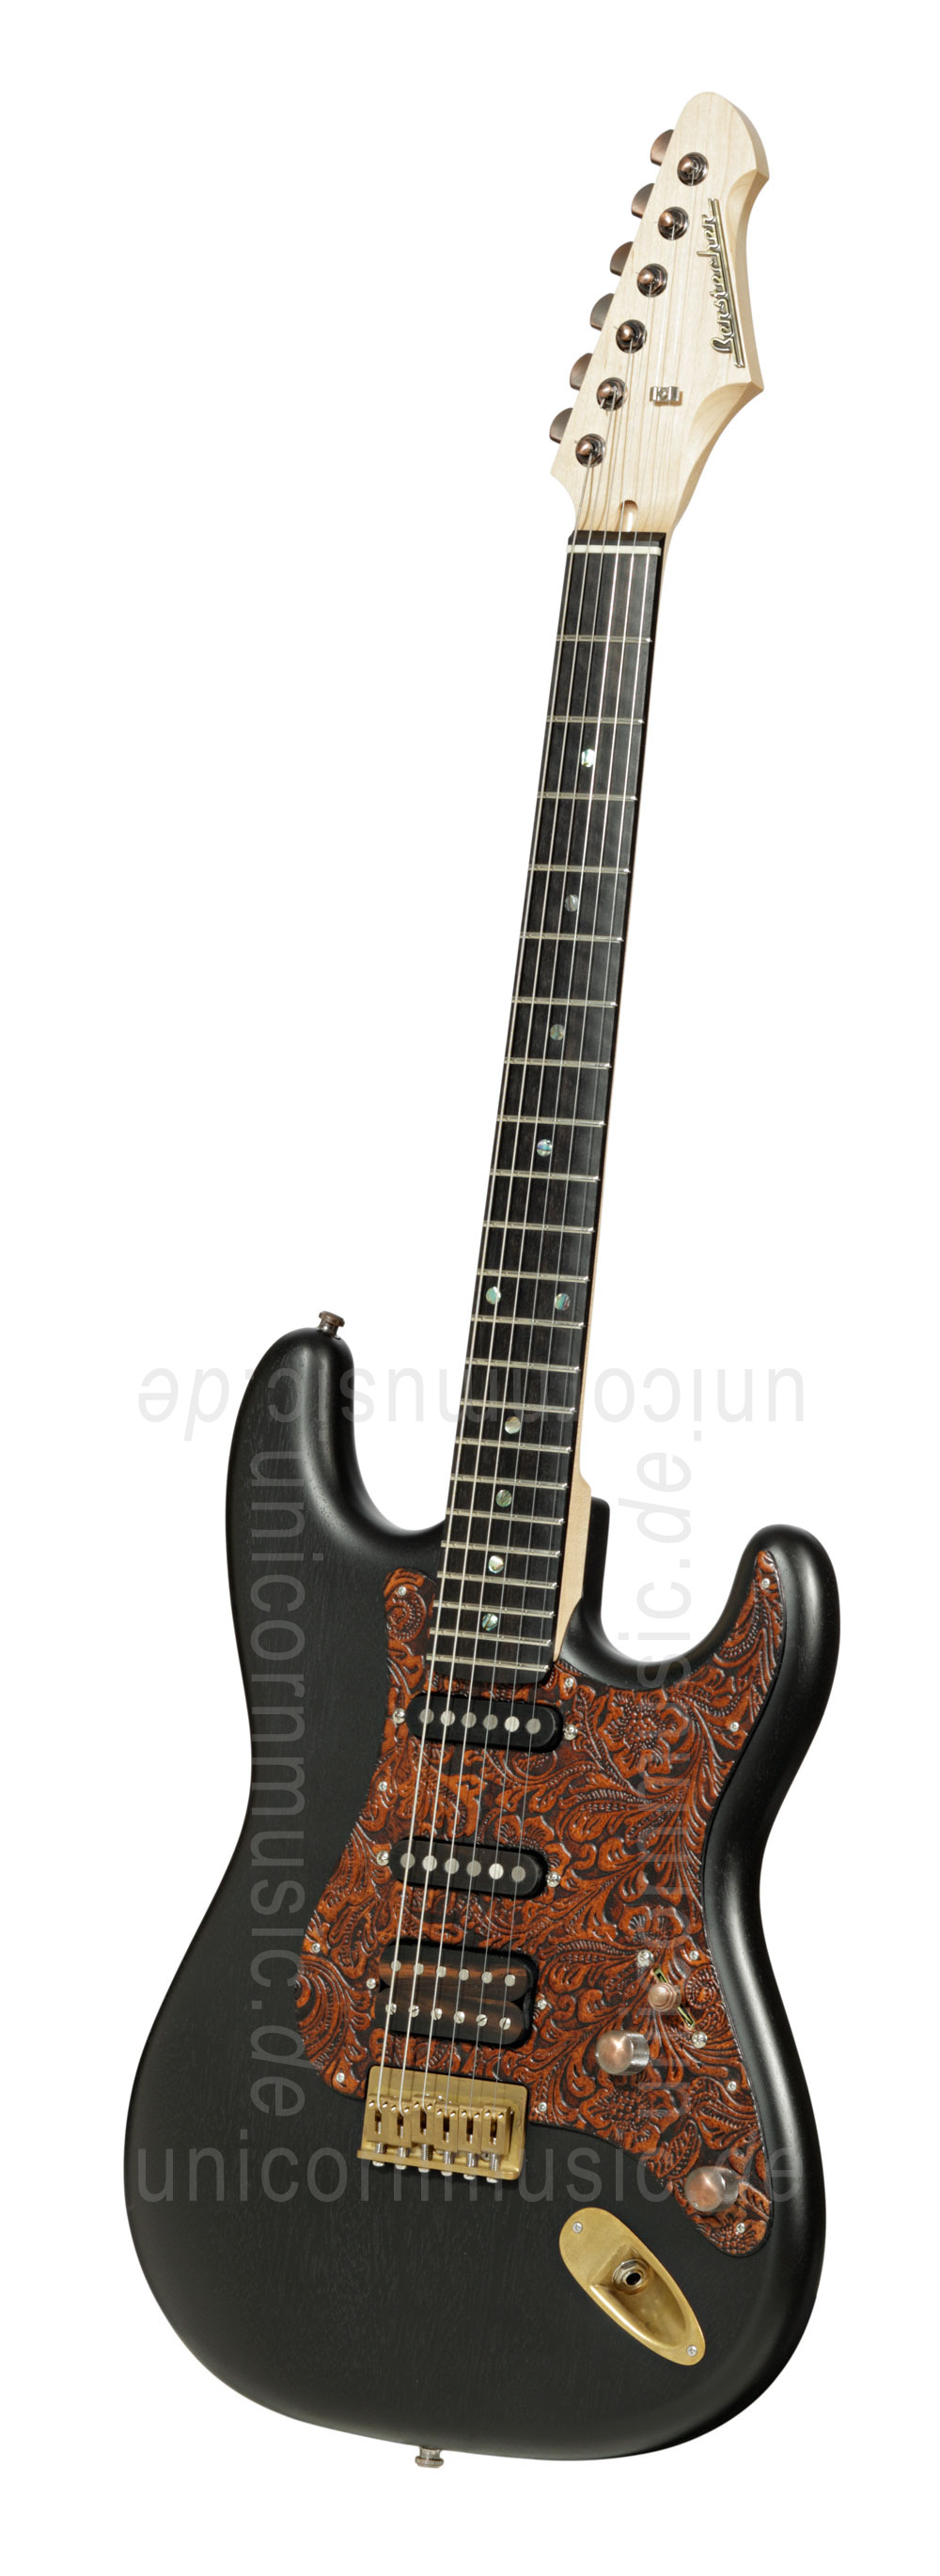 to article description / price Electric Guitar BERSTECHER Vintage 2018 - Black / Floral Amber + hard case - made in Germany